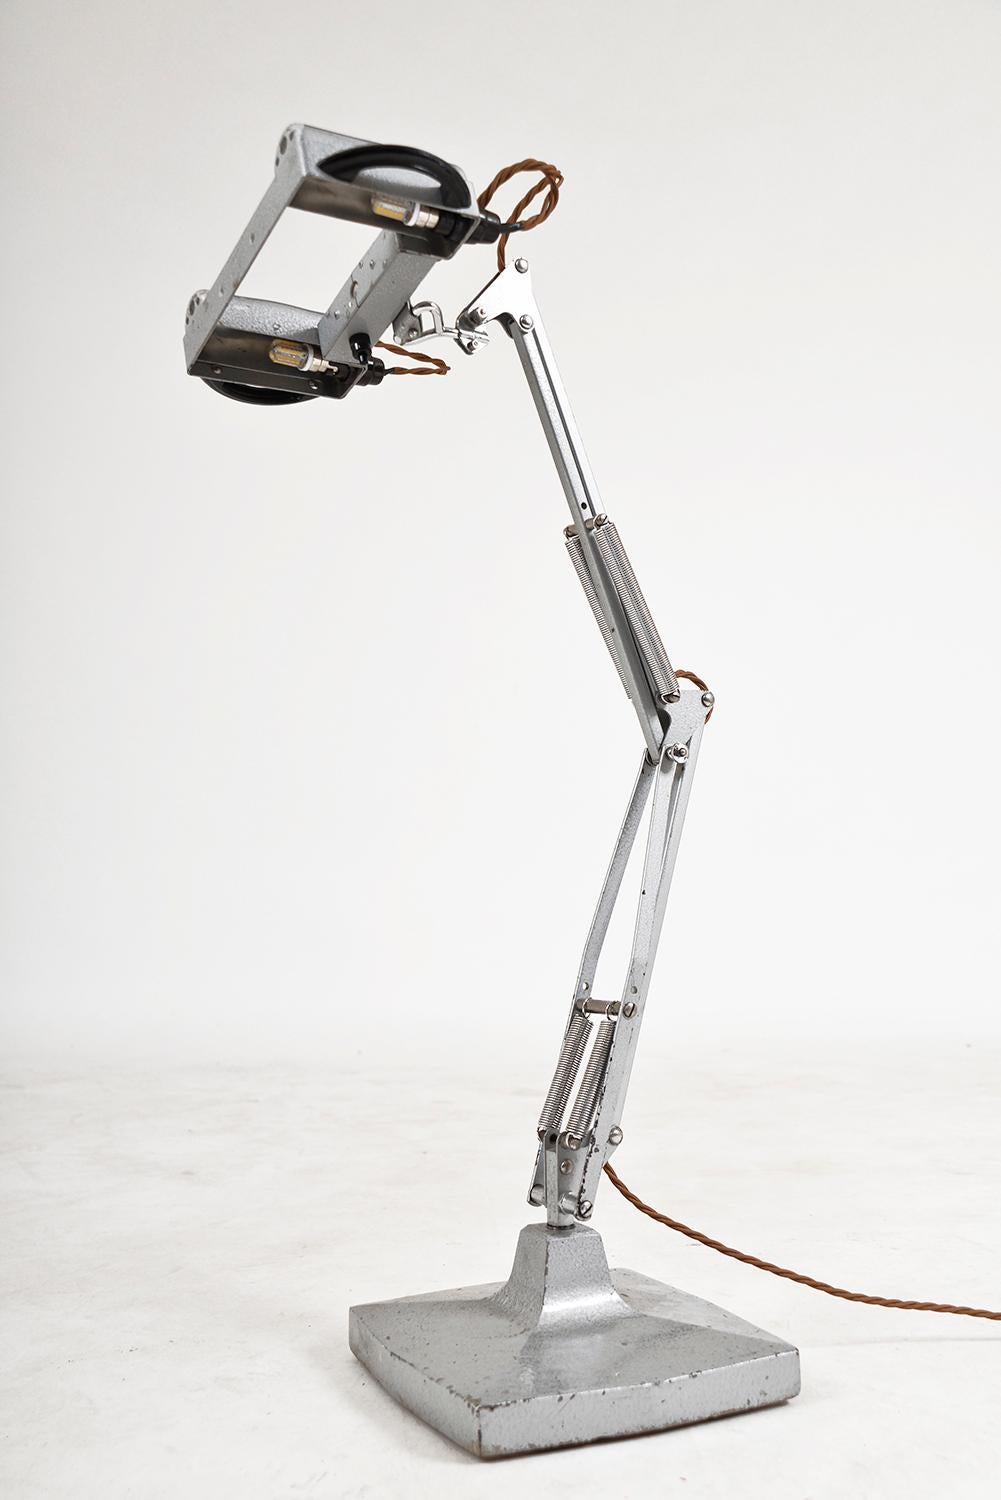 anglepoise magnifier